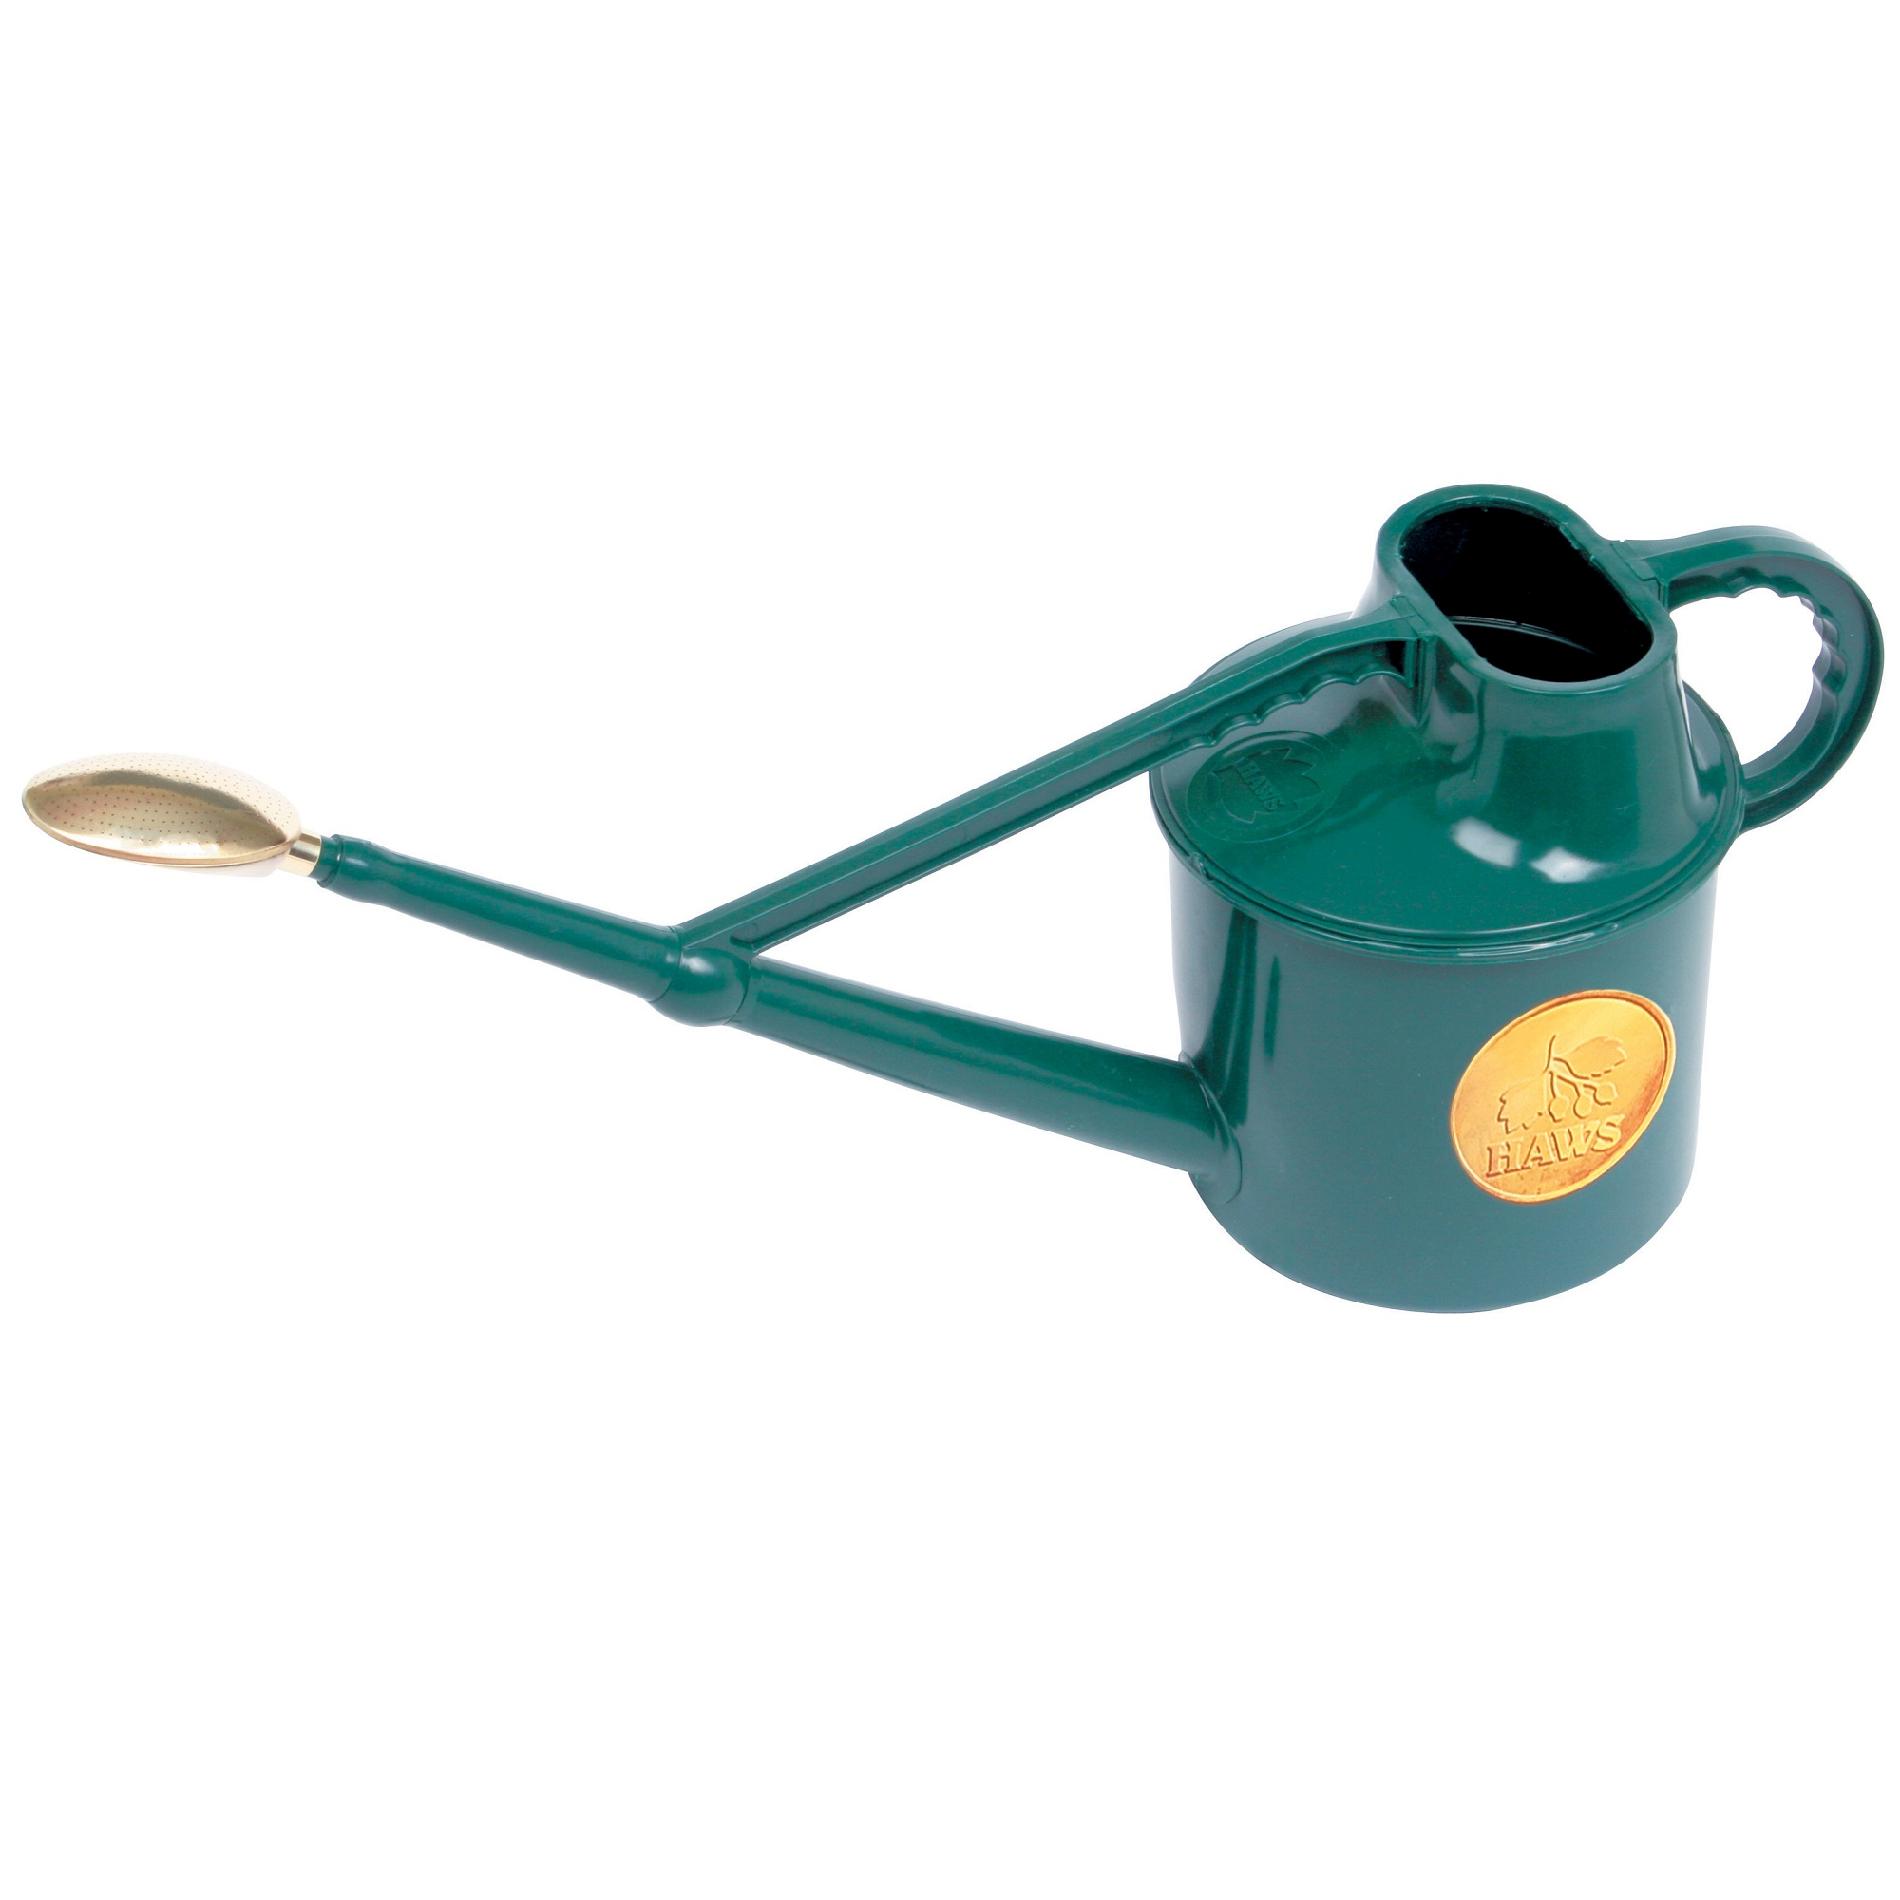 Deluxe 1.8 gallon Outdoor Green Plastic Watering Can